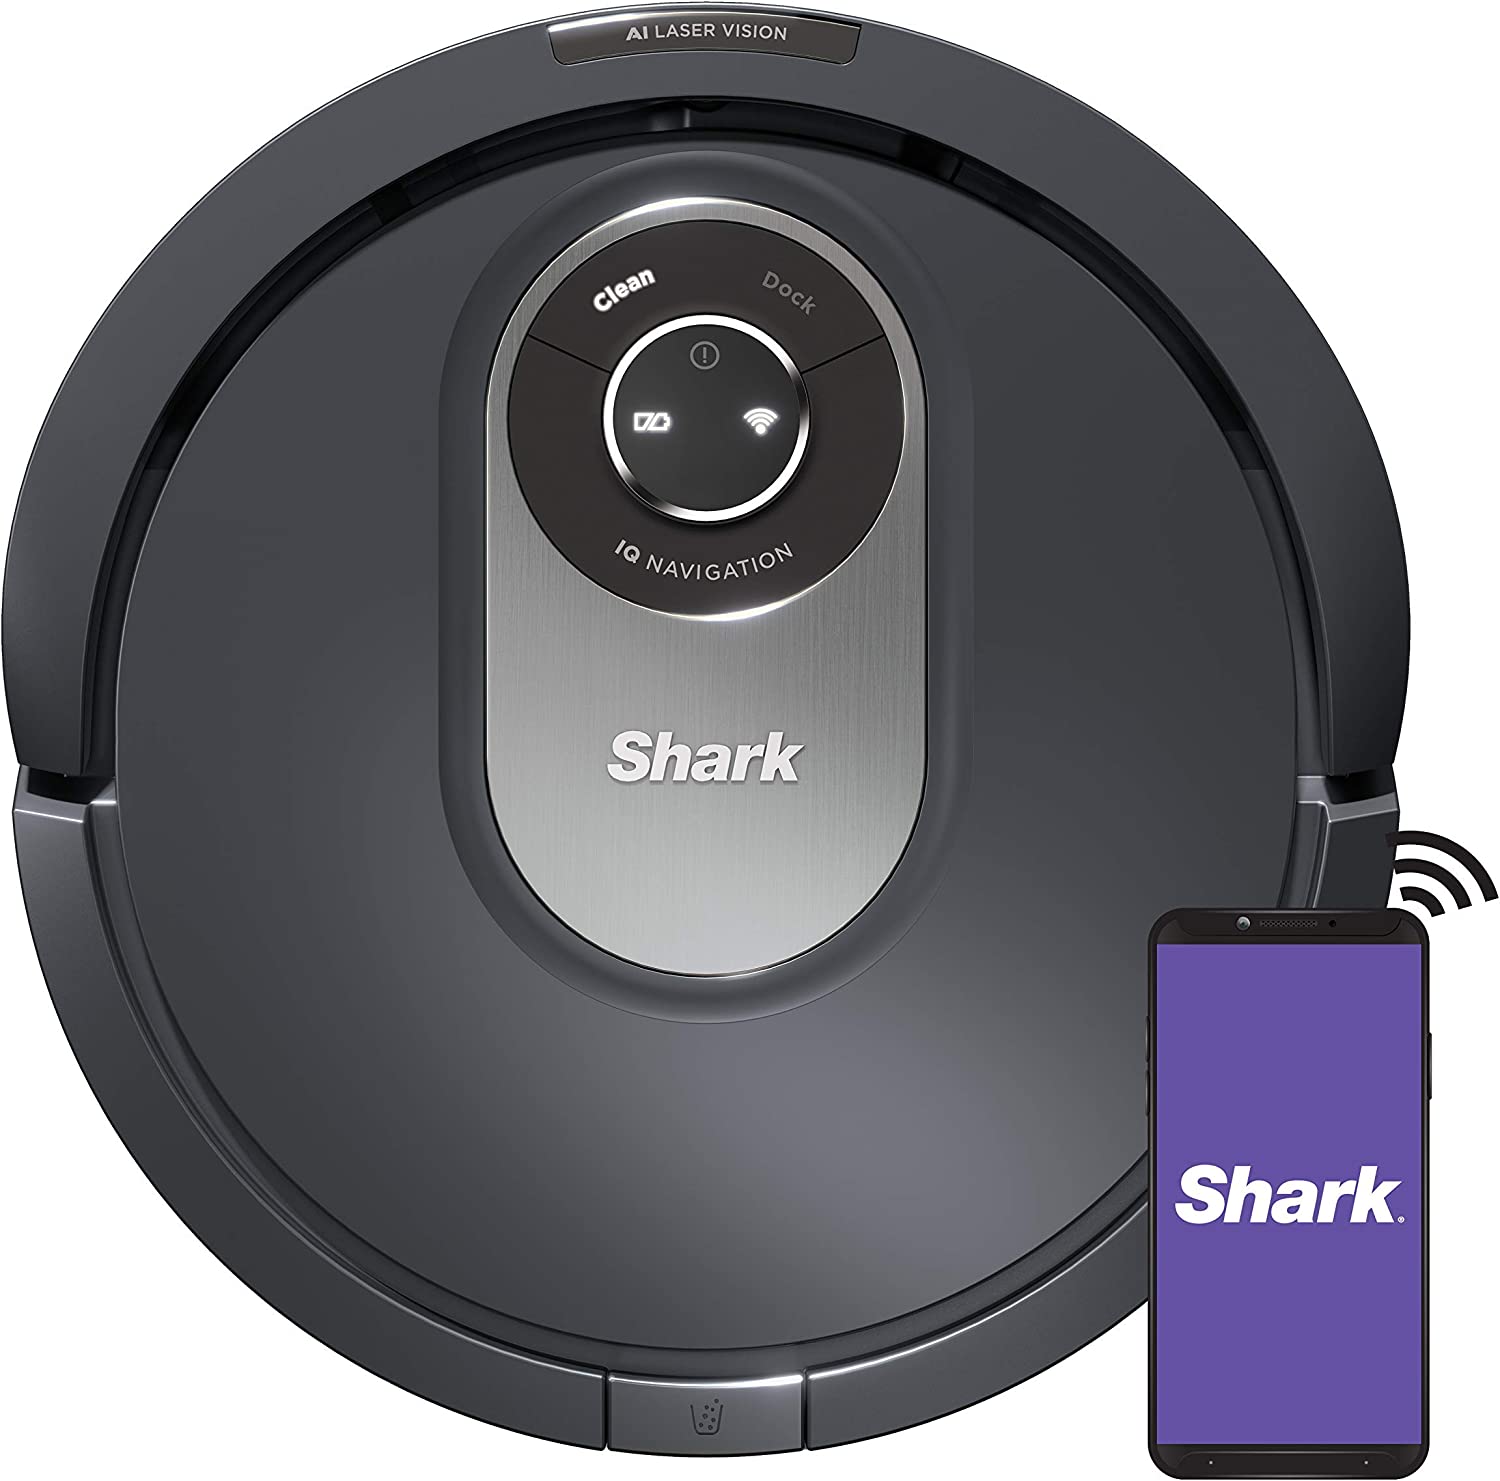 Shark Al Robot RV2001 Wifi Connected Robot Vacuum w/AI Laser Vision - Gray (Pre-Owned)